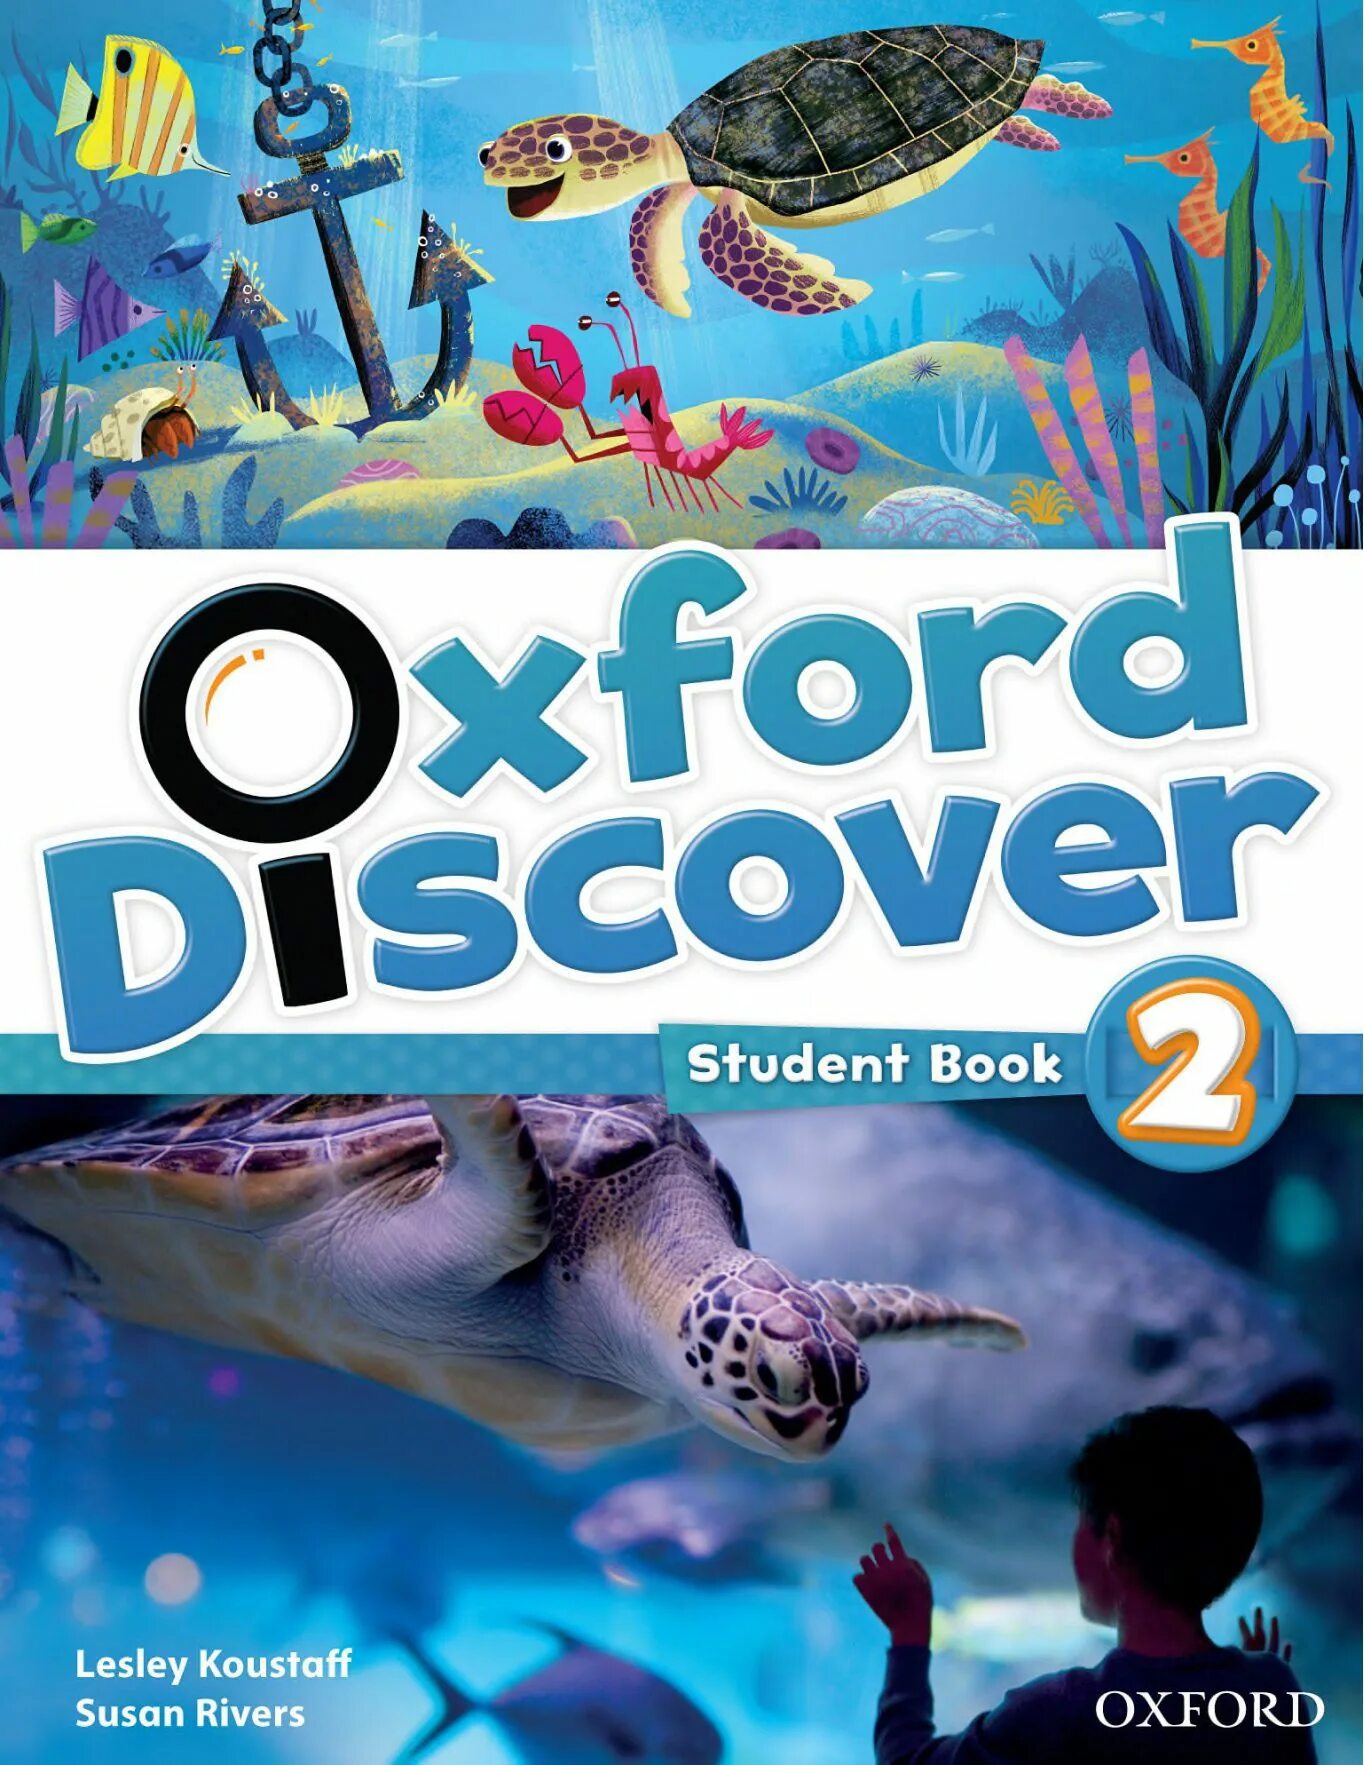 Oxford discover 2nd Edition. Oxford Discovery 2. Oxford discover 1 student book. Oxford Discovery student's book. Discover students book